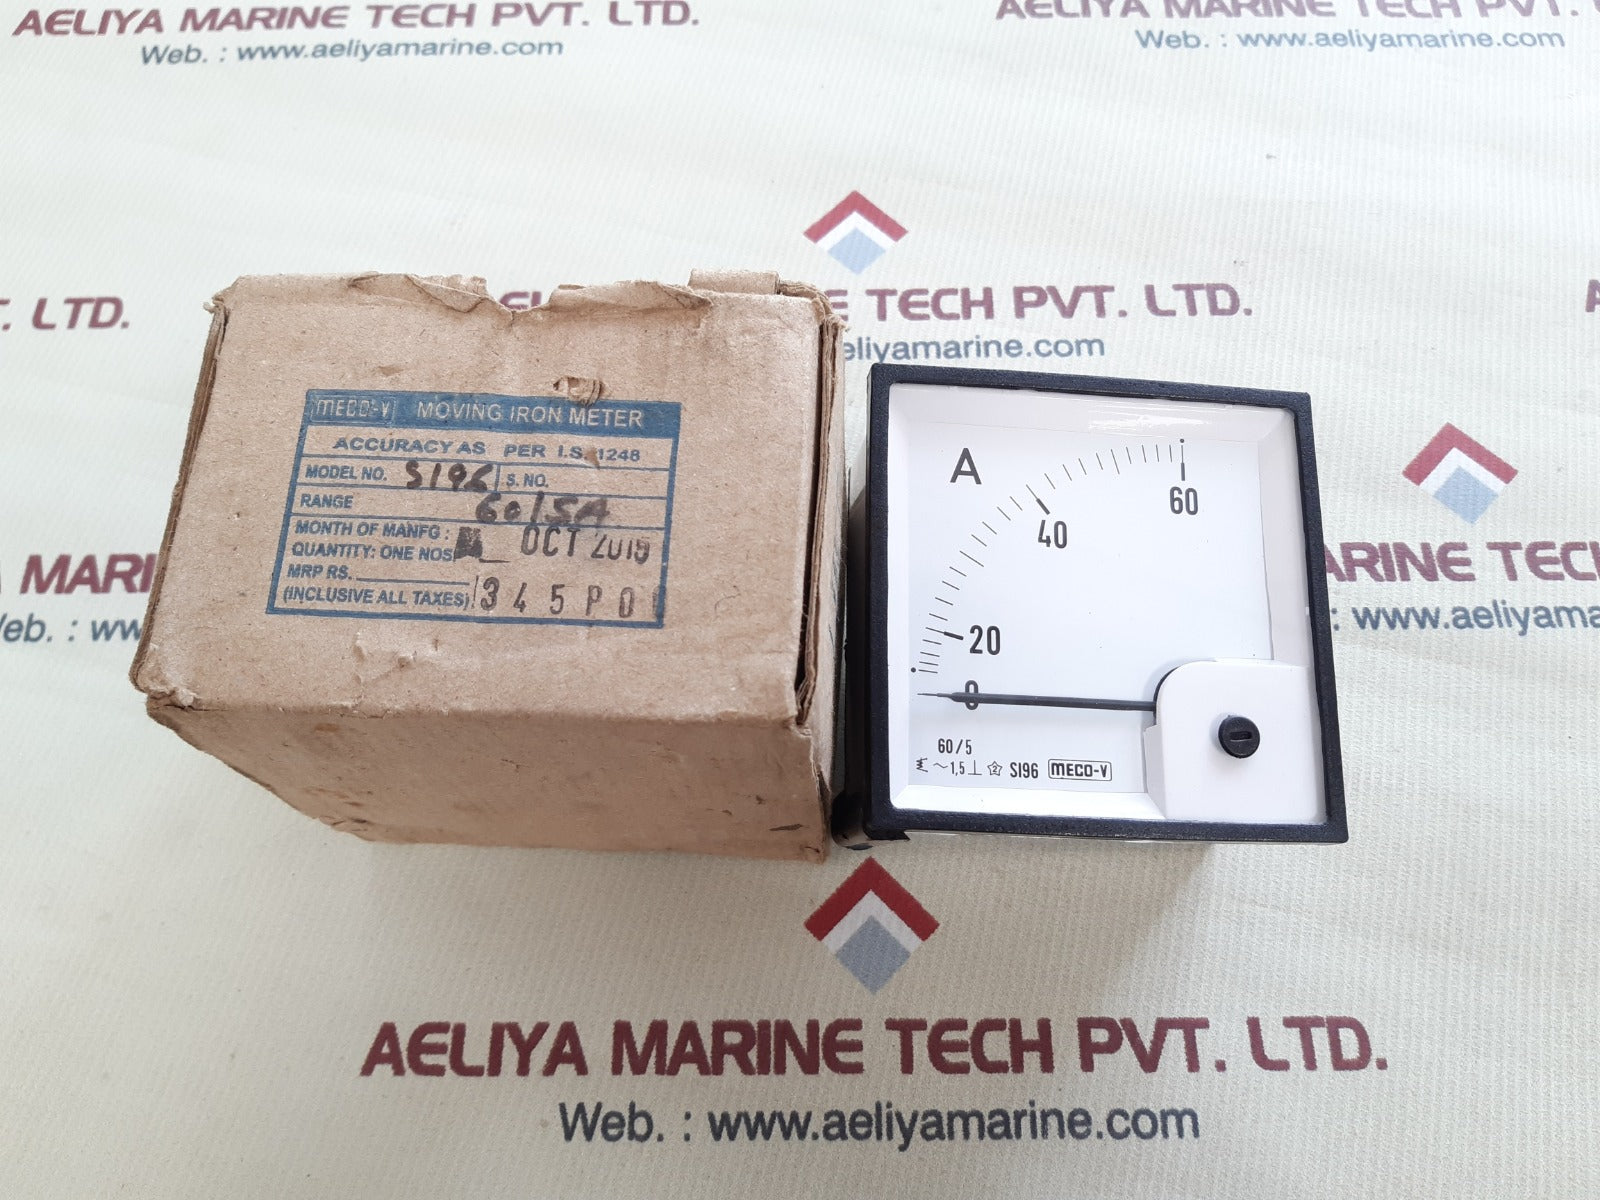 Meco-v si96 moving iron meter 0-60a